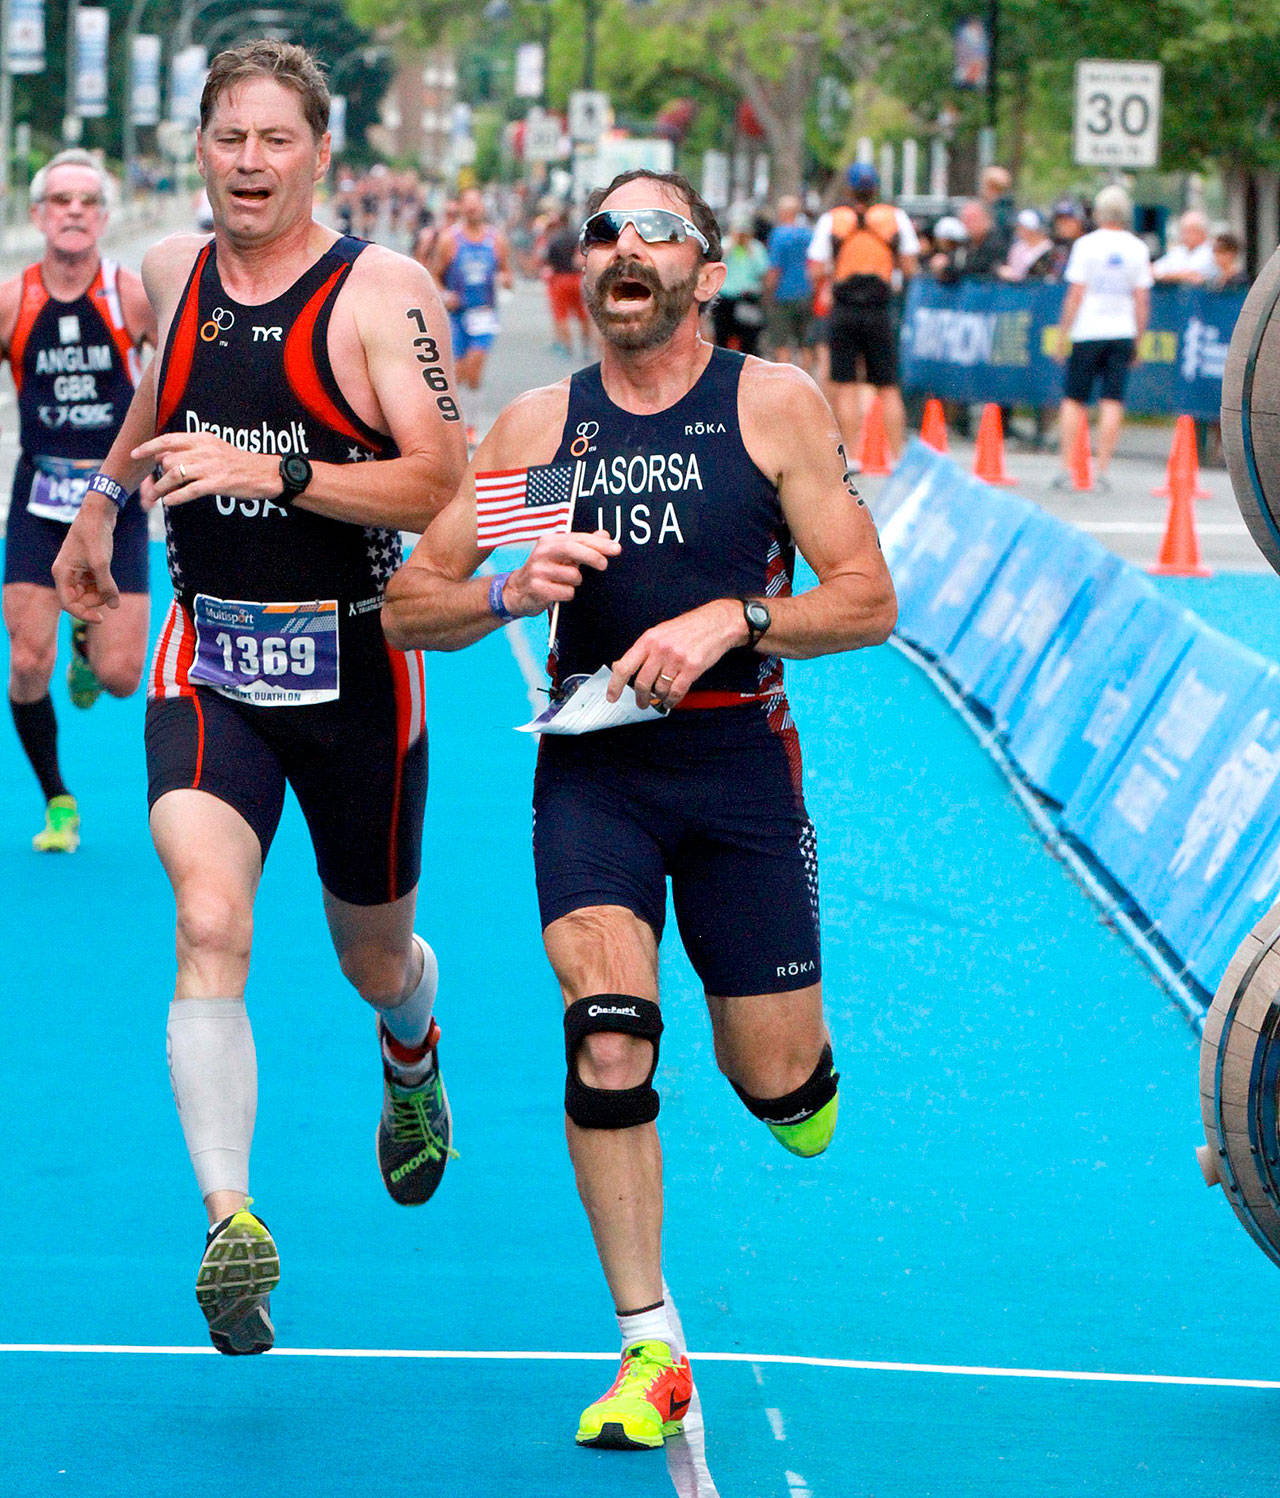 Port Angeles’ Dave Lasorsa crosses the finish line just ahead of U.S. teammate Mark Drangsholt at the World Duathlon championships held in Pentiction, B.C., on Aug. 19. Lasorsa finished 12th in the 60-64 category.